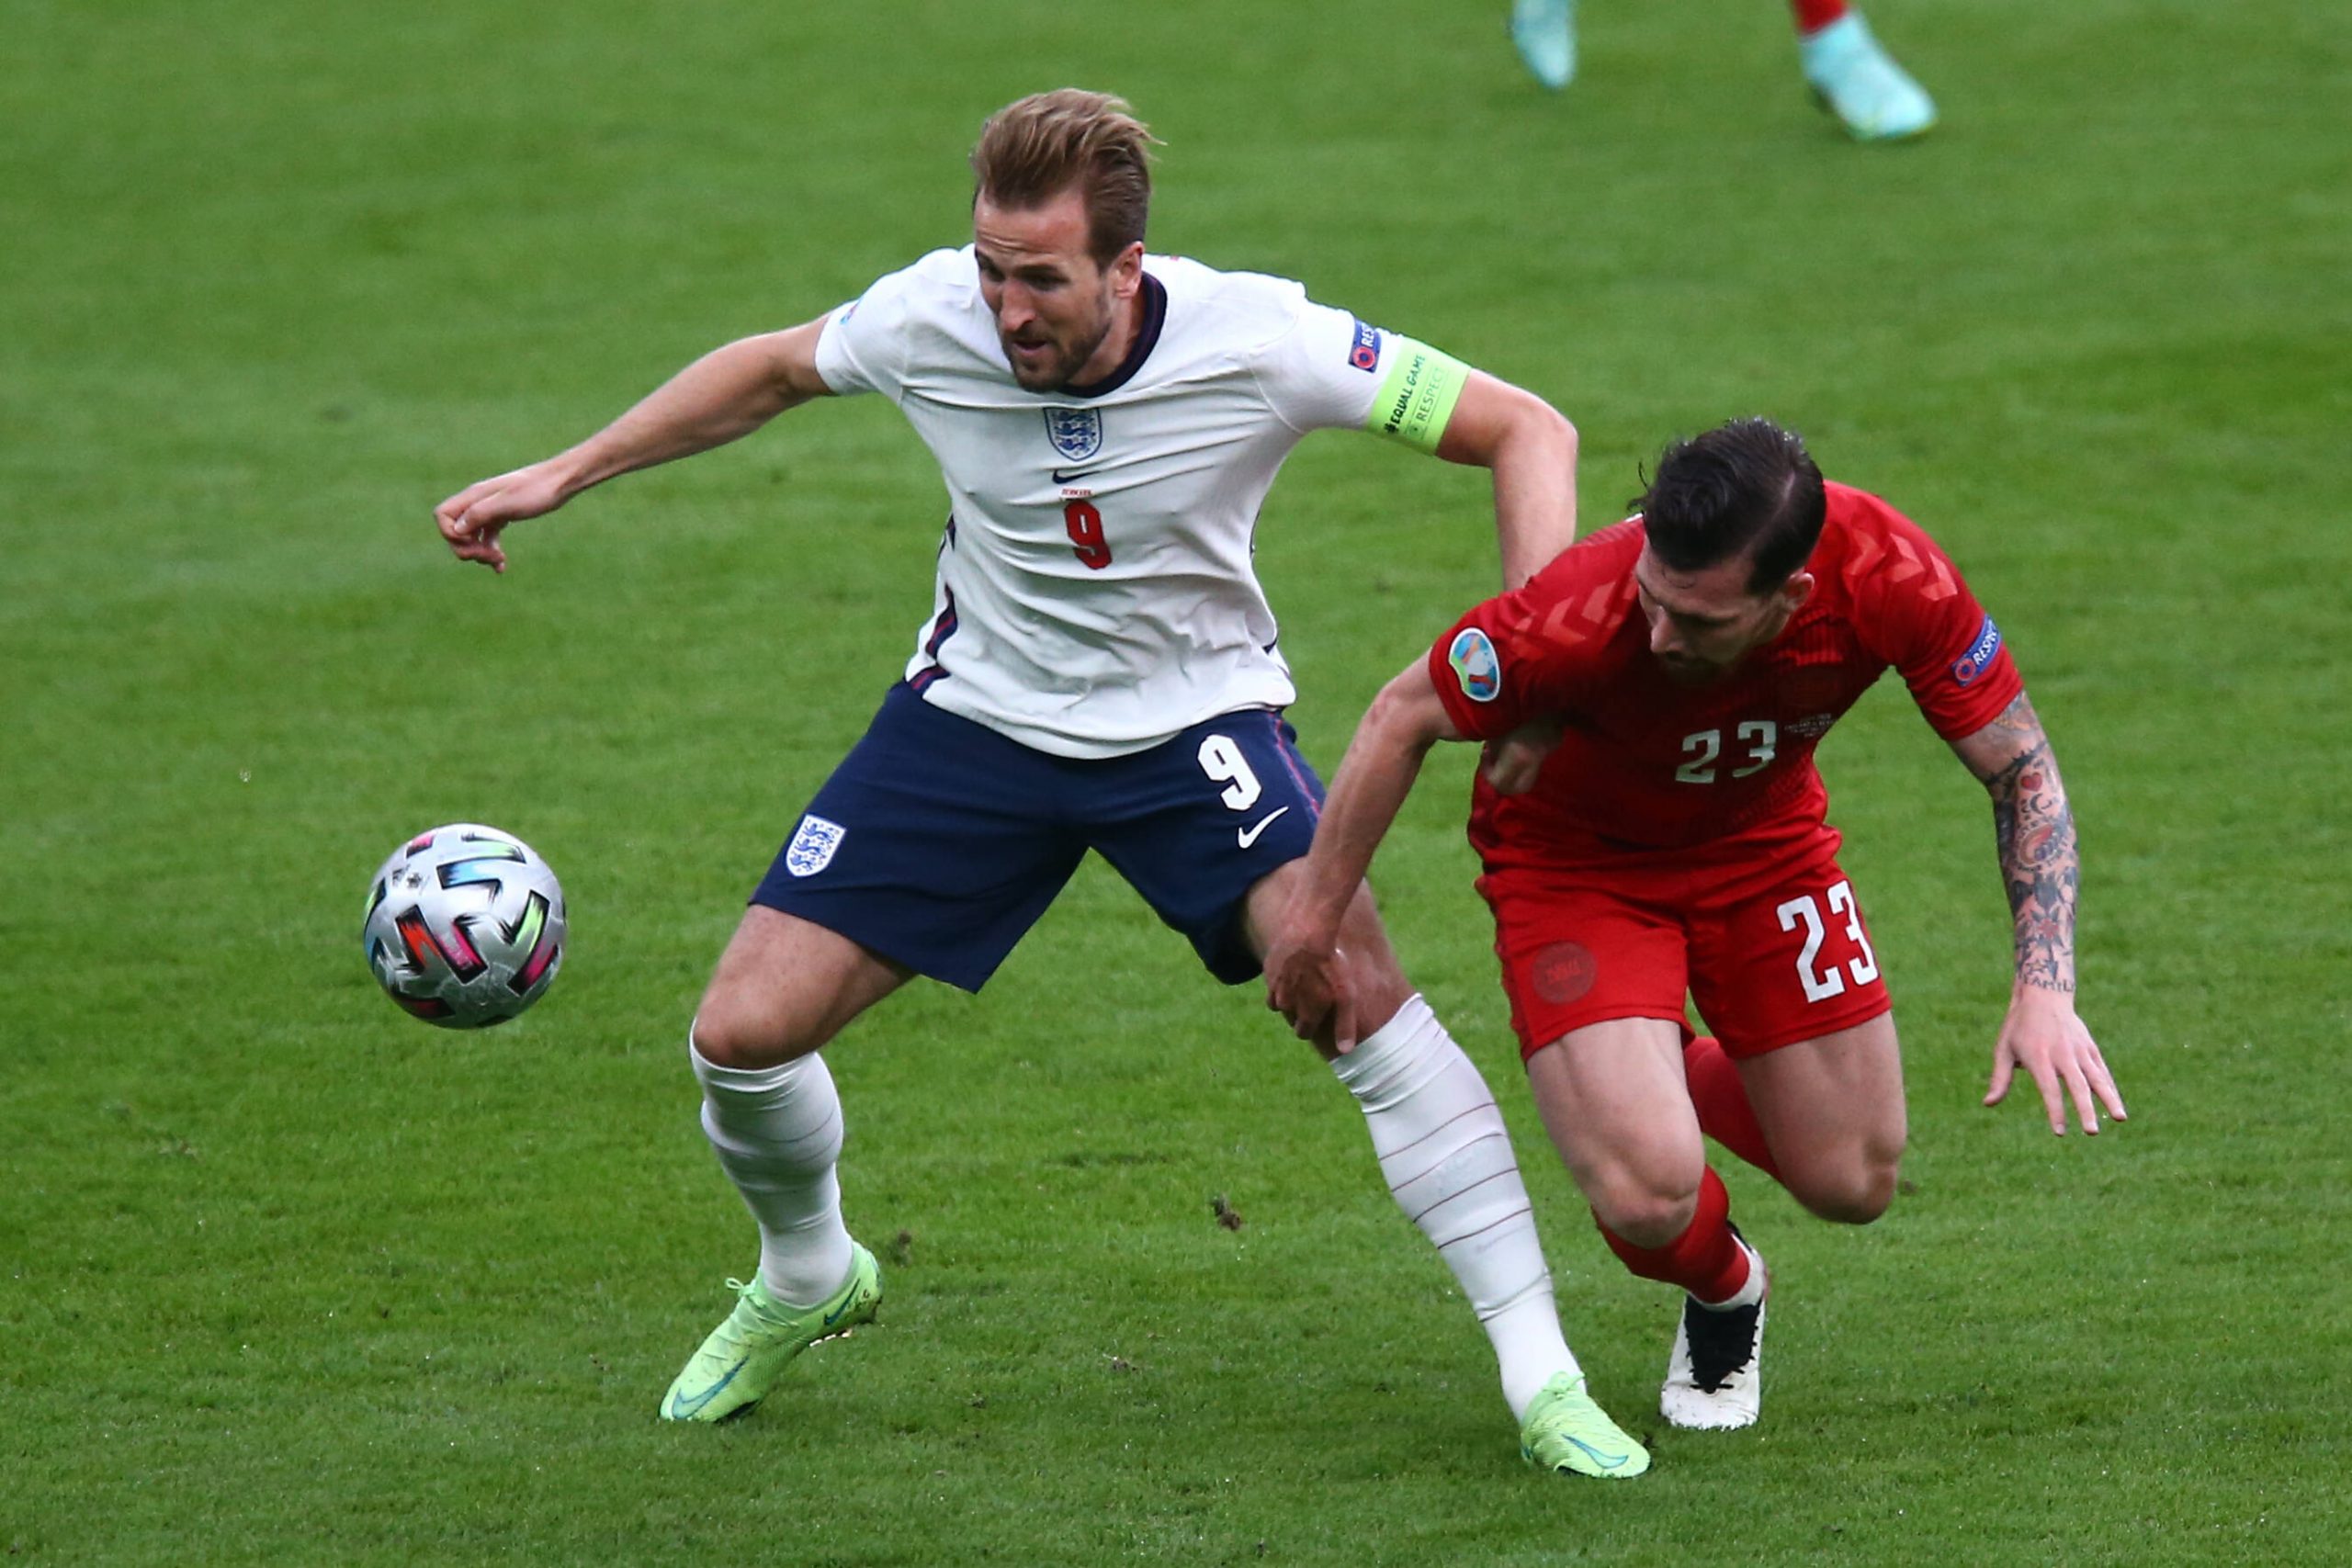 Harry Kane and Pierre-Emile Hojbjerg in action at UEFA Euros 2020.